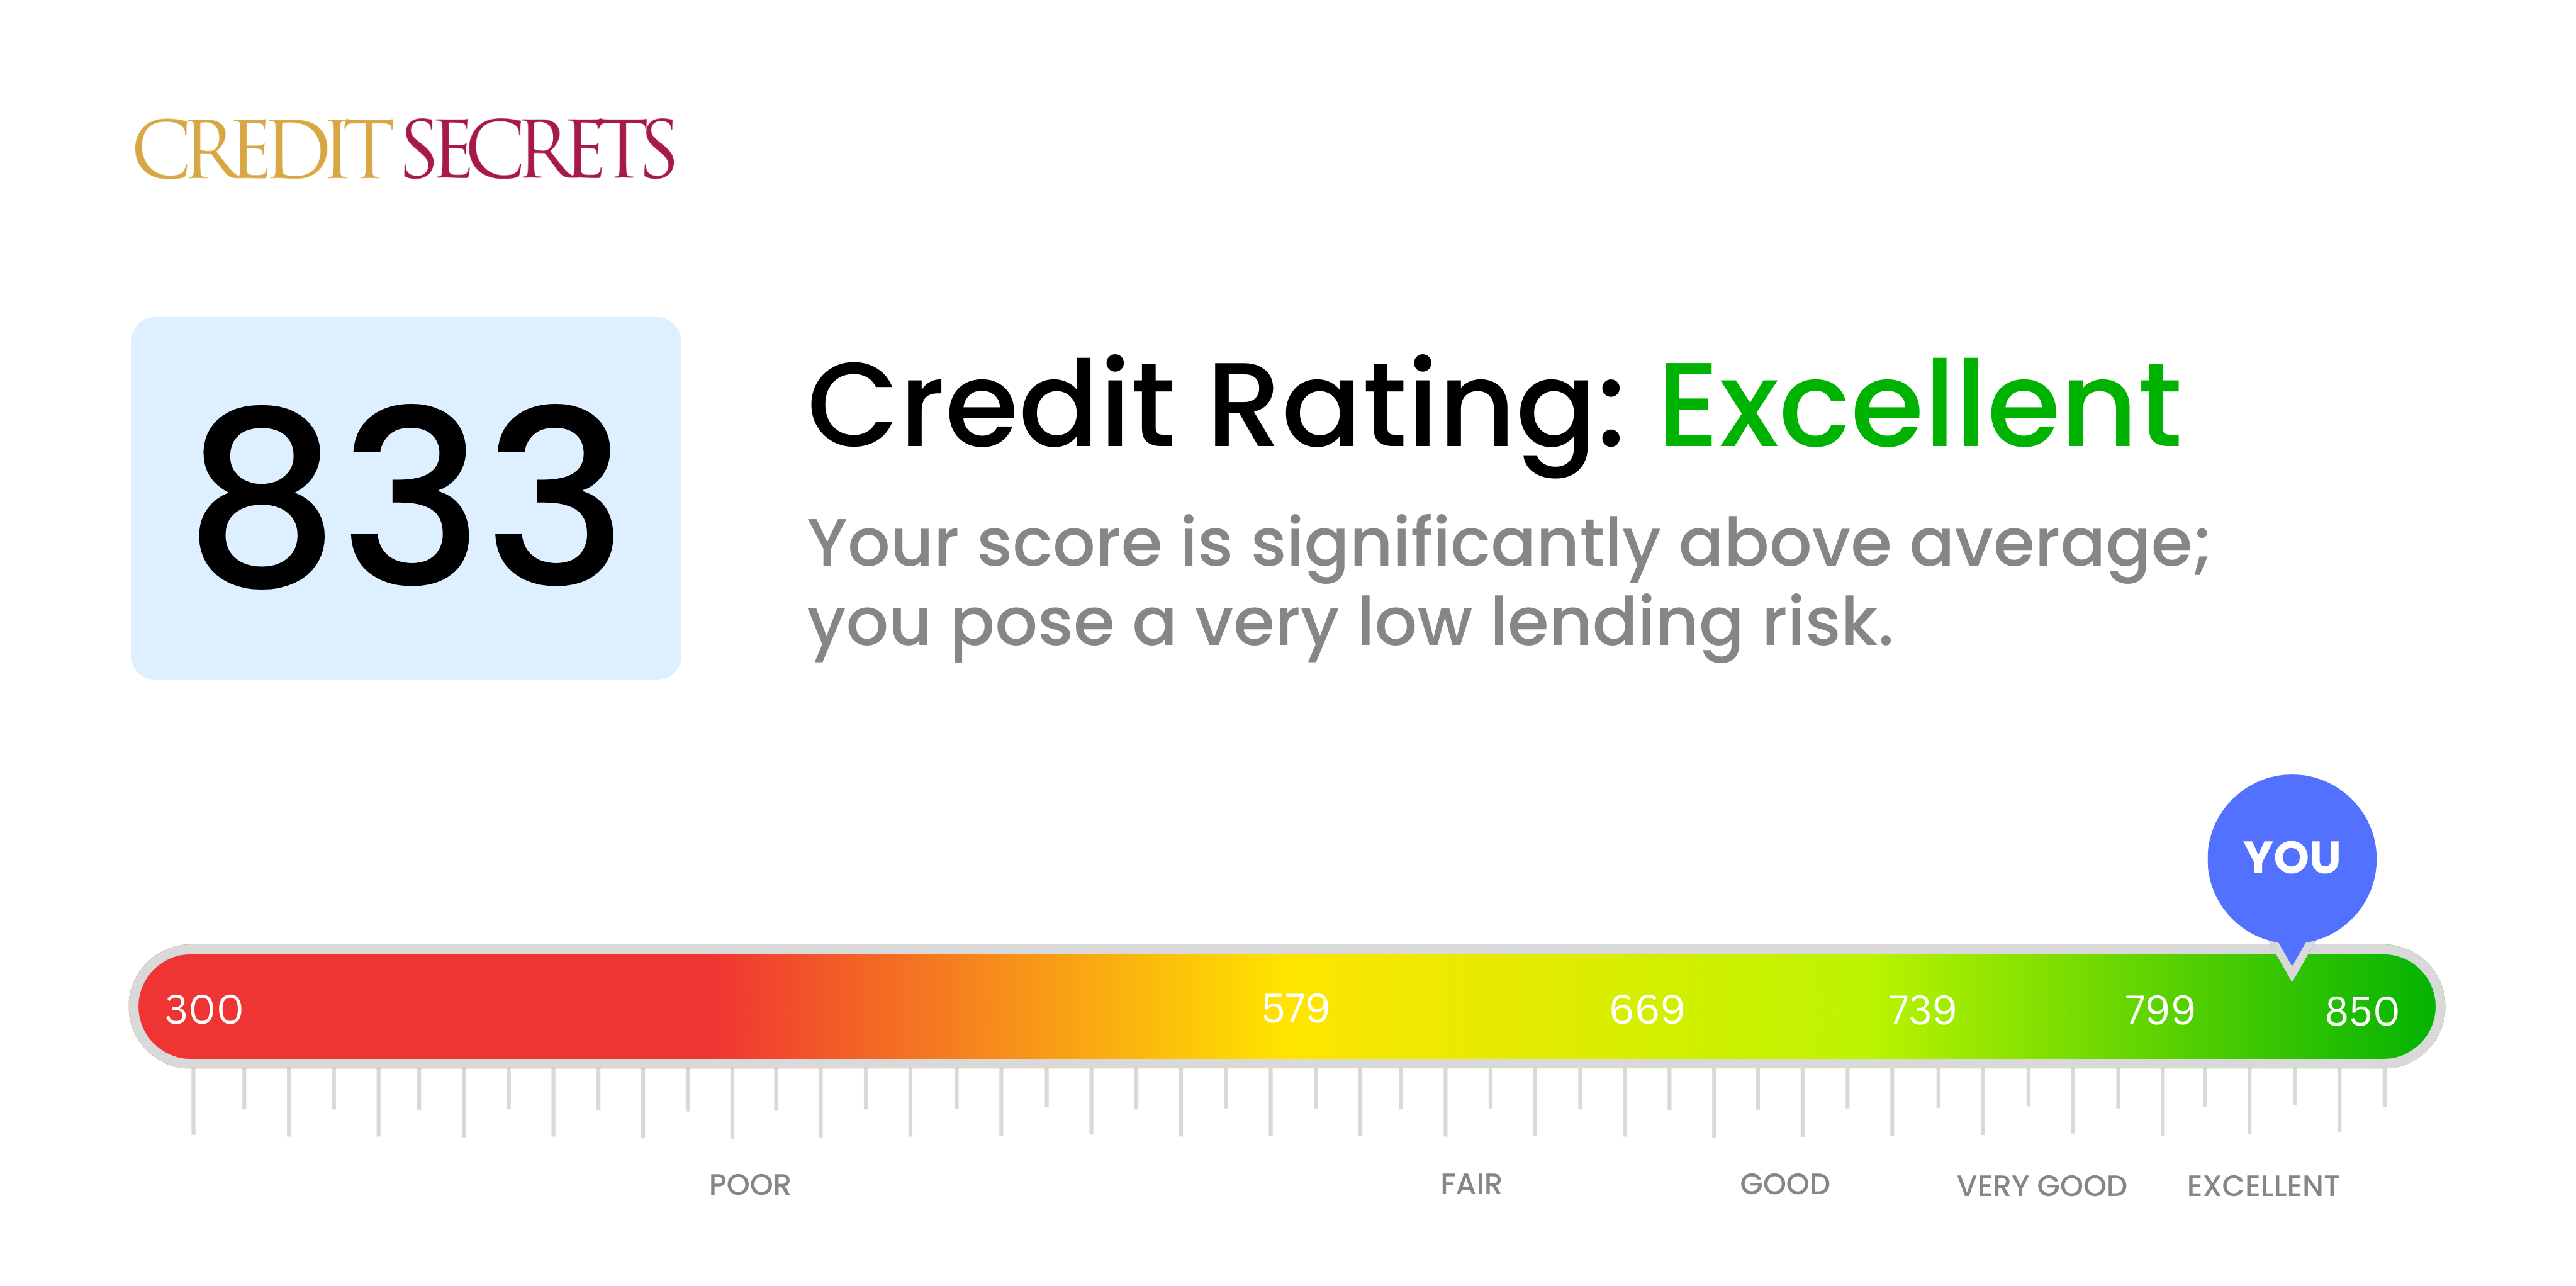 Is 833 a good credit score?